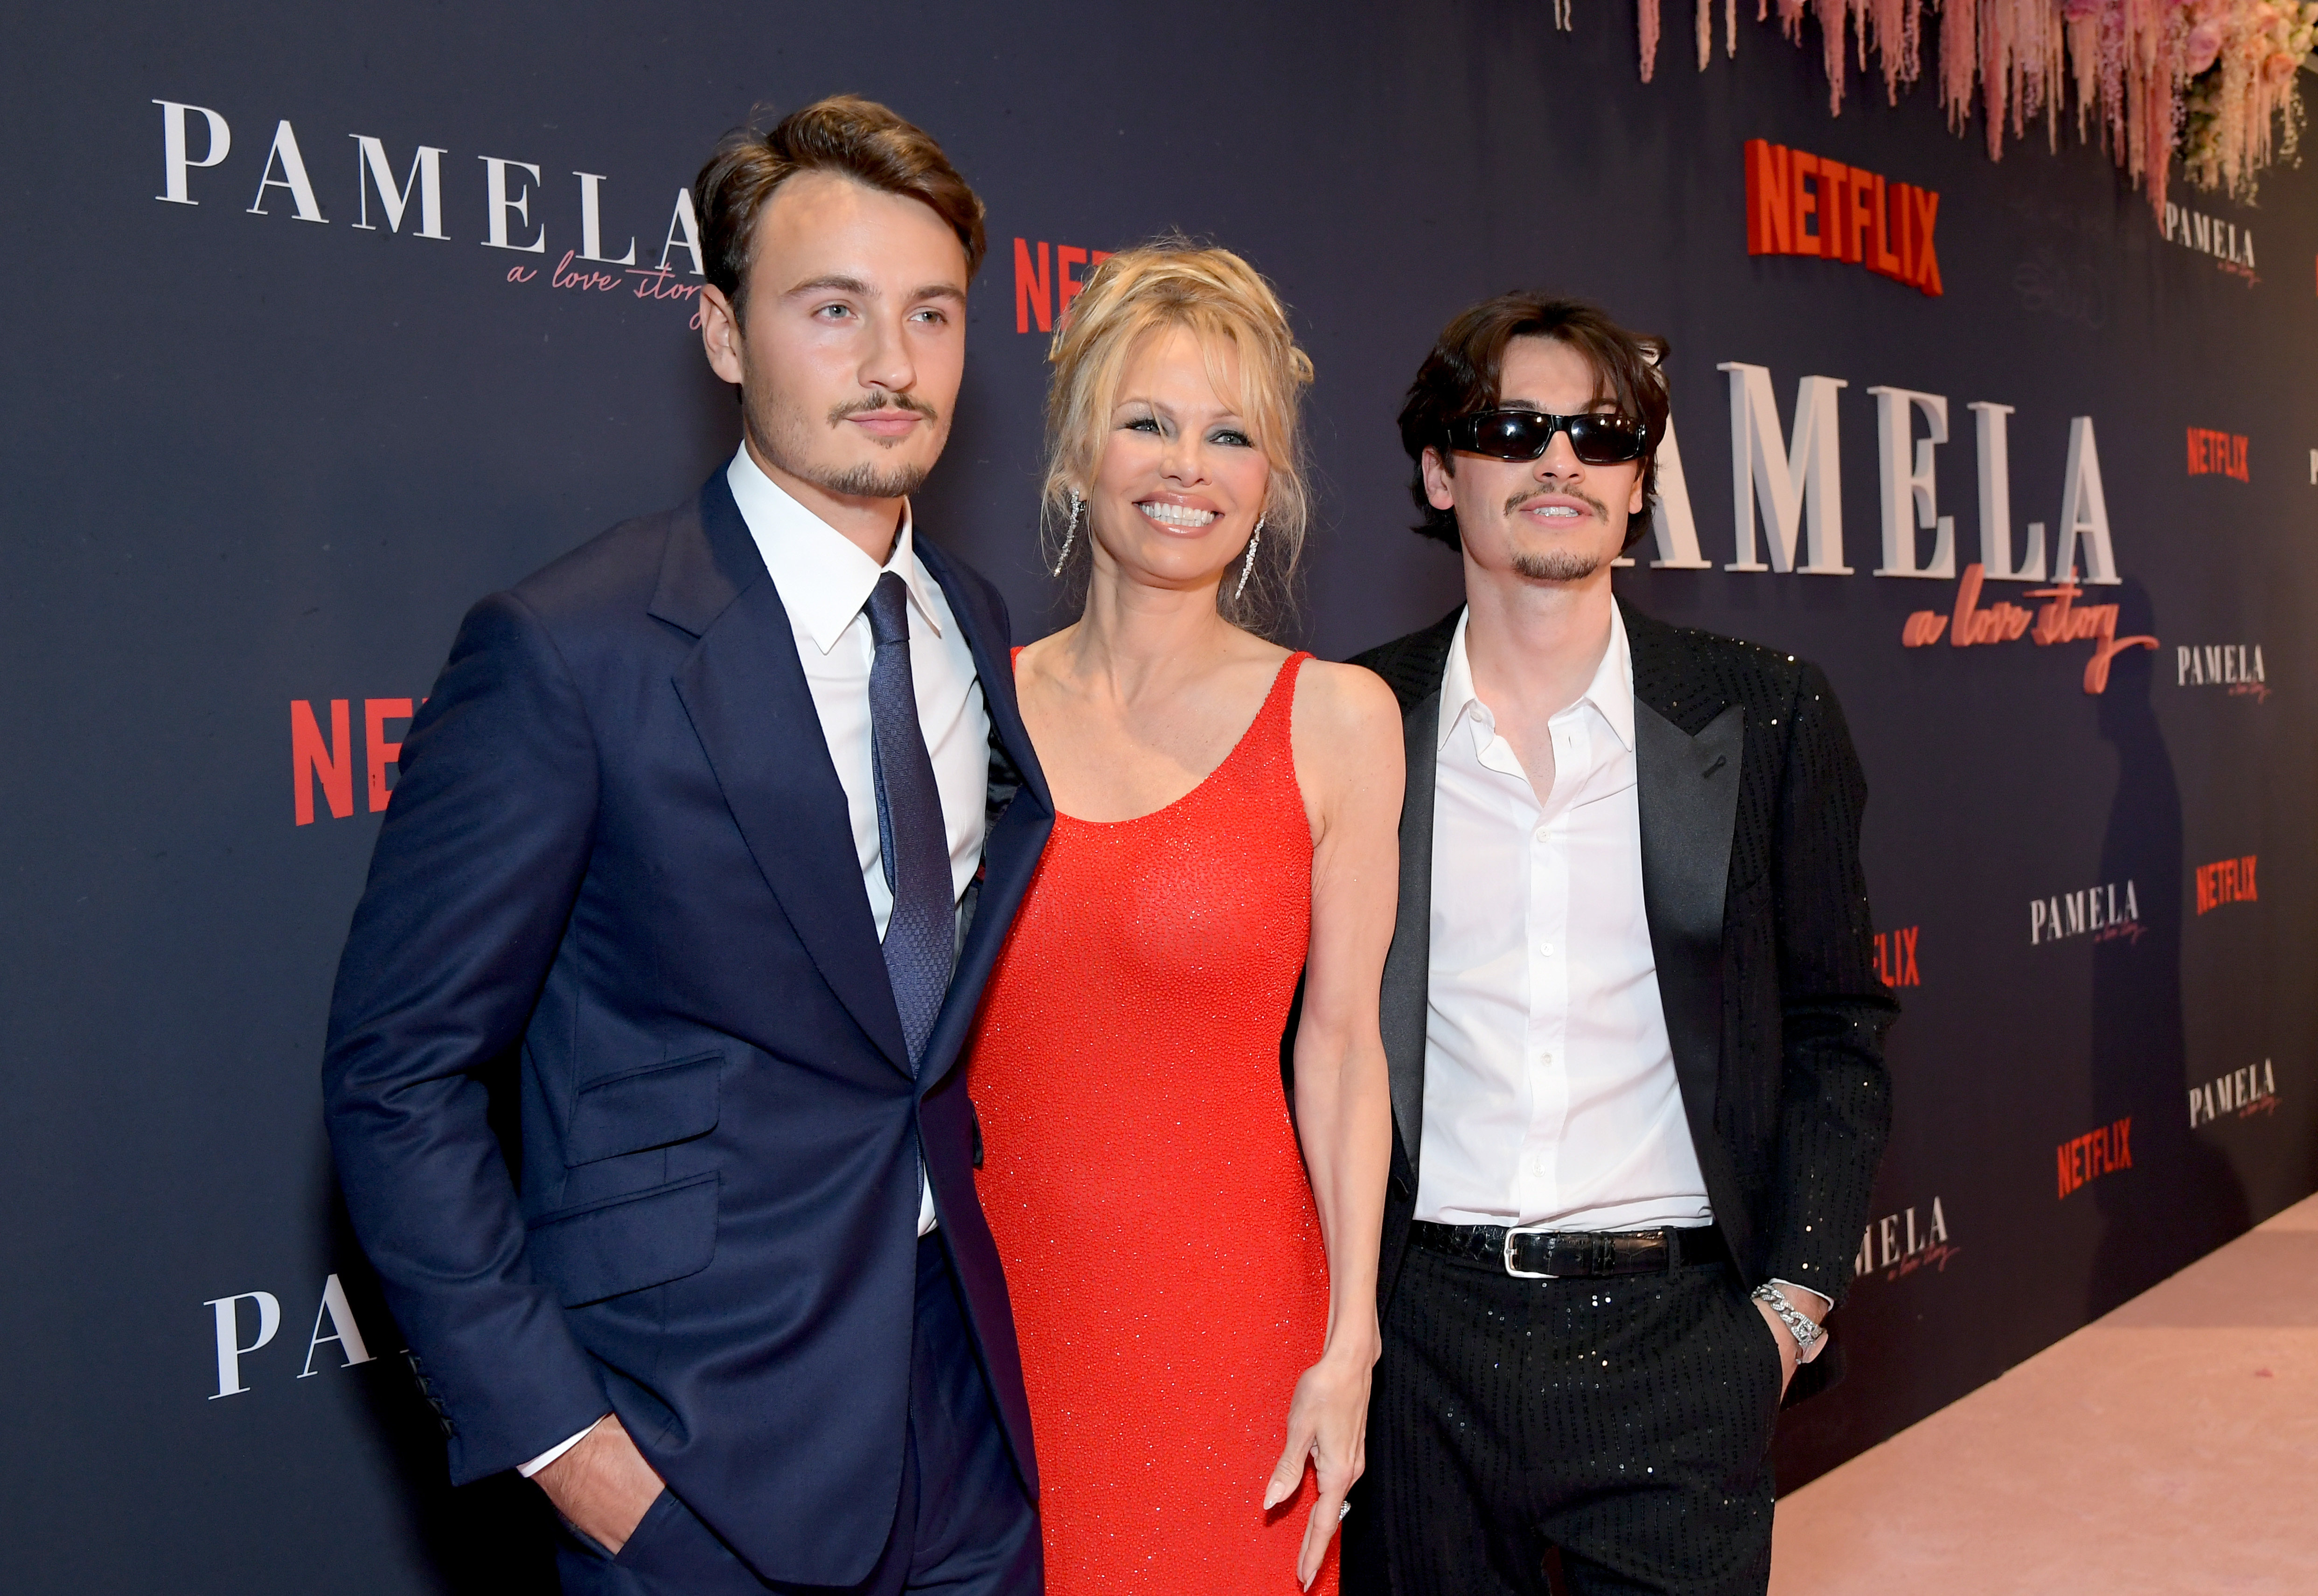 Pamela Anderson with Brandon and Dylan Lee at the premiere of Netflix's "Pamela, A Love Story" at Netflix Tudum Theater in Los Angeles, California on January 30, 2023 | Source: Getty Images